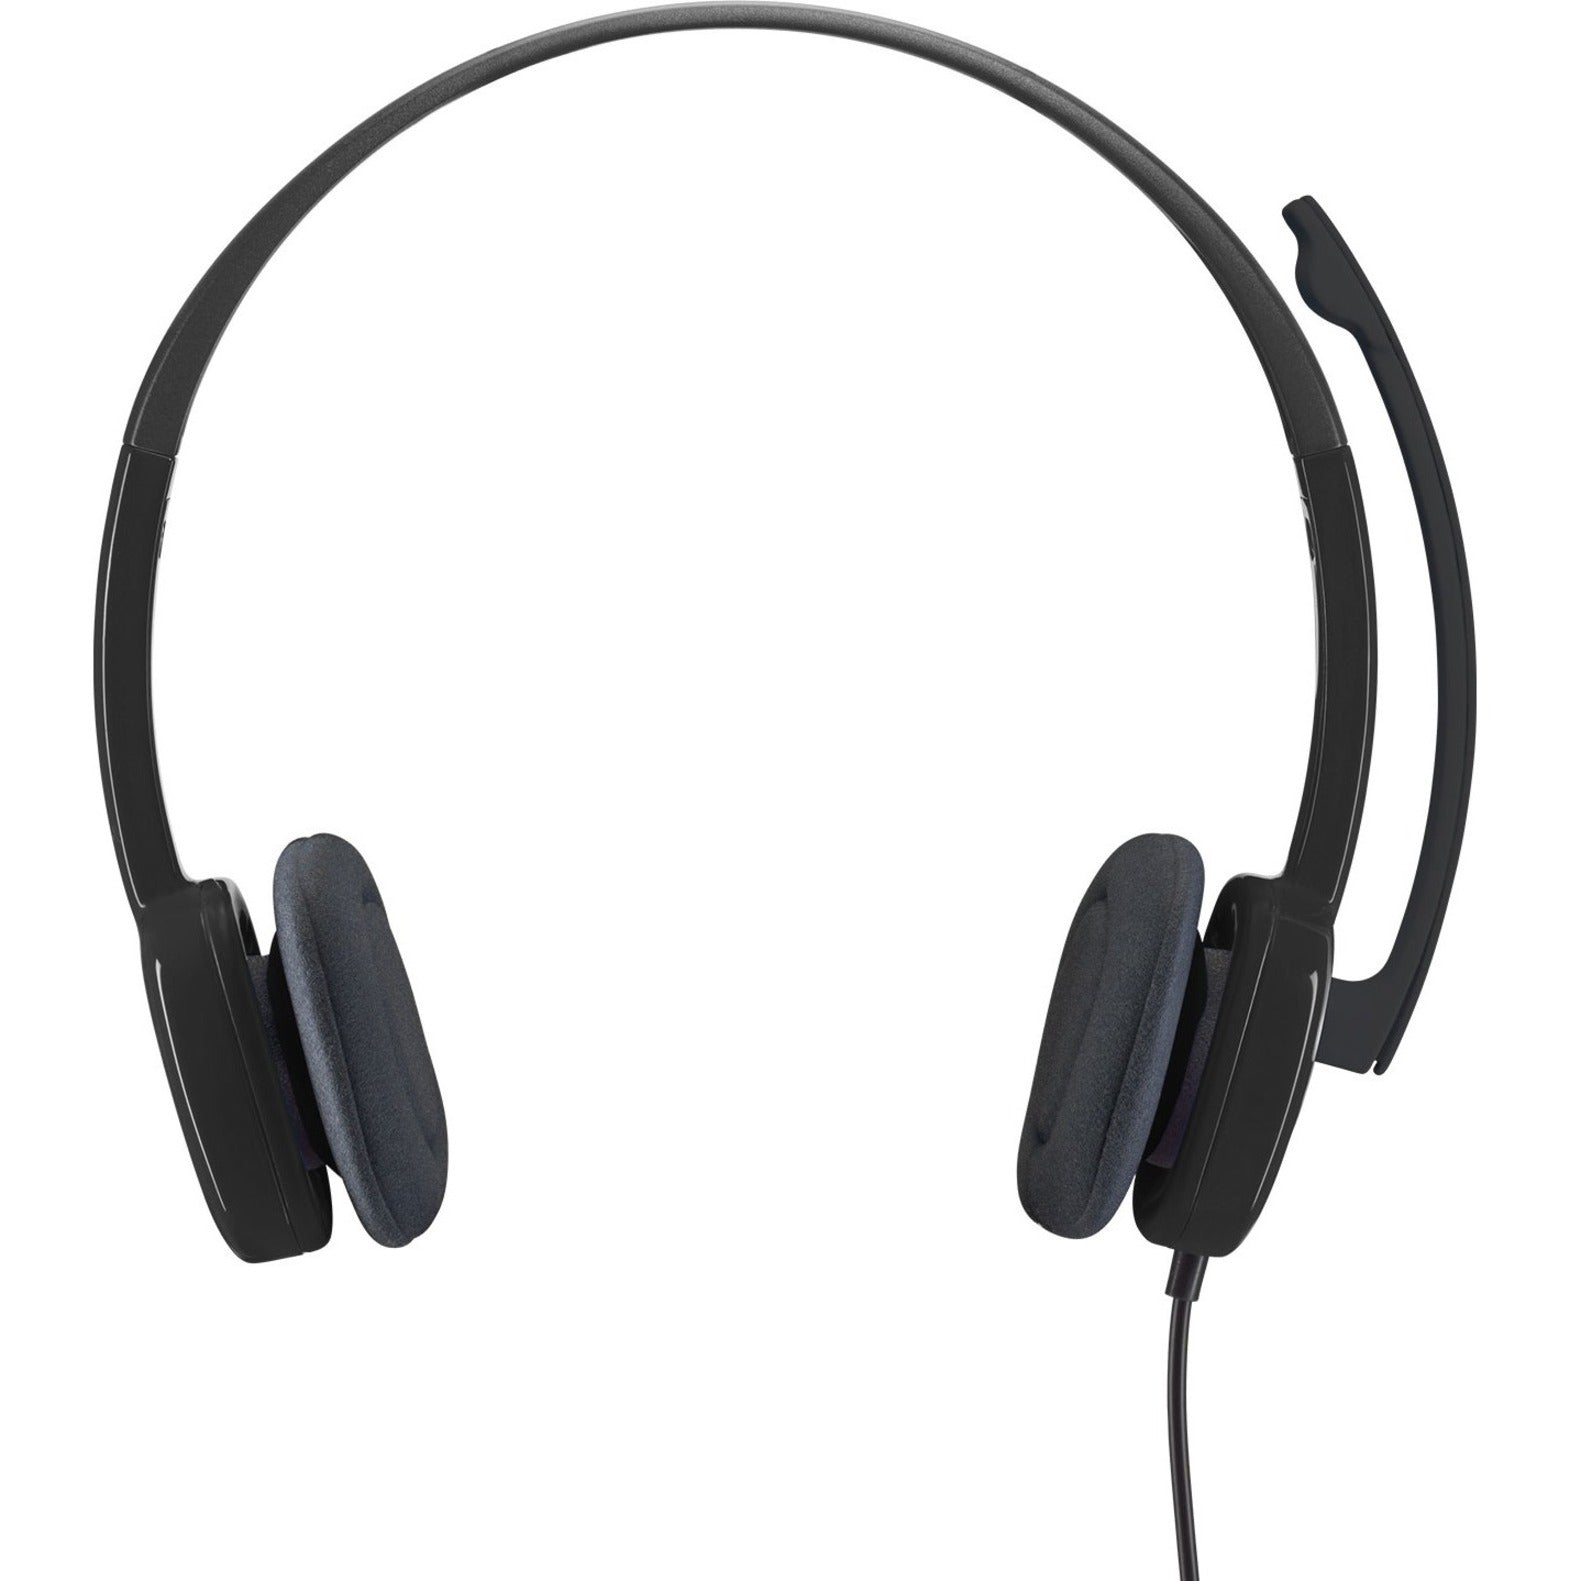 Logitech 981-000587 Stereo Headset H151, Binaural Over-the-head, 2 Year Warranty, Boom Microphone, Mini-phone (3.5mm) Interface, In-Line Controller, Comfortable, Adjustable Headband, Noise Canceling, Wired